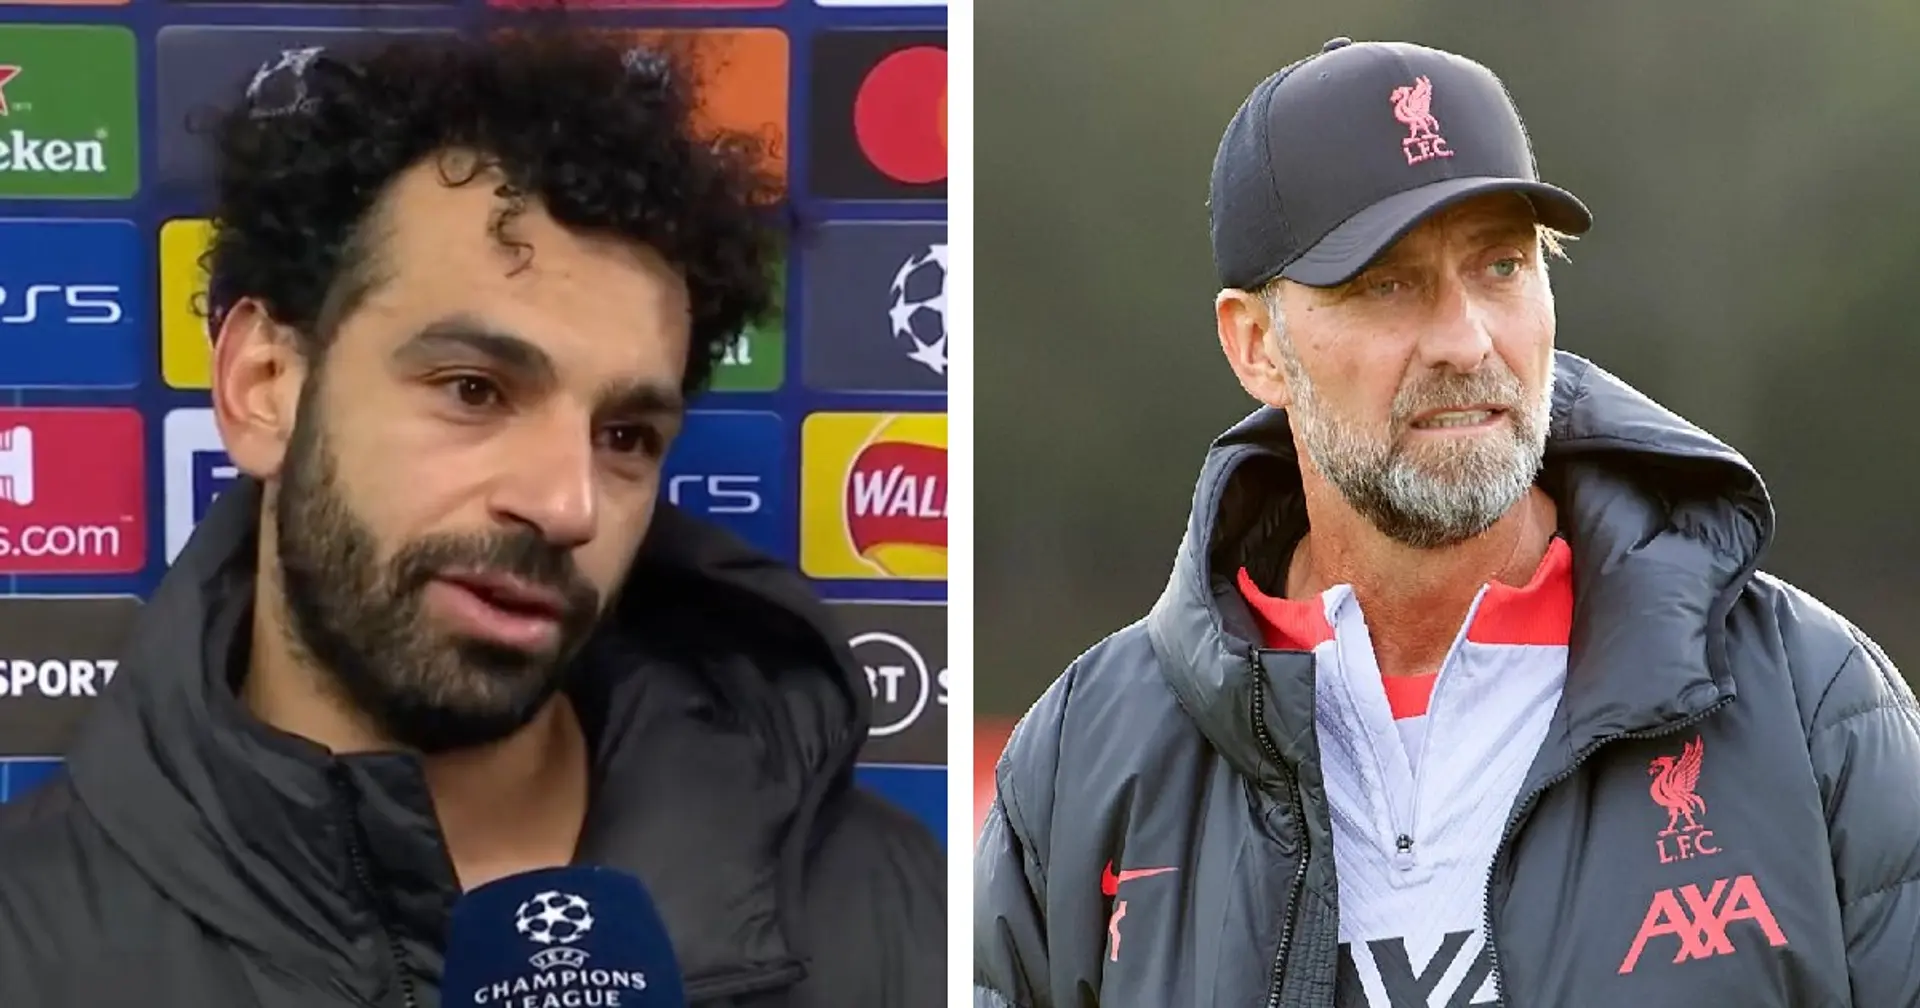 'The gaffer told us yesterday': Salah reveals Klopp told players new plan a day before Rangers game